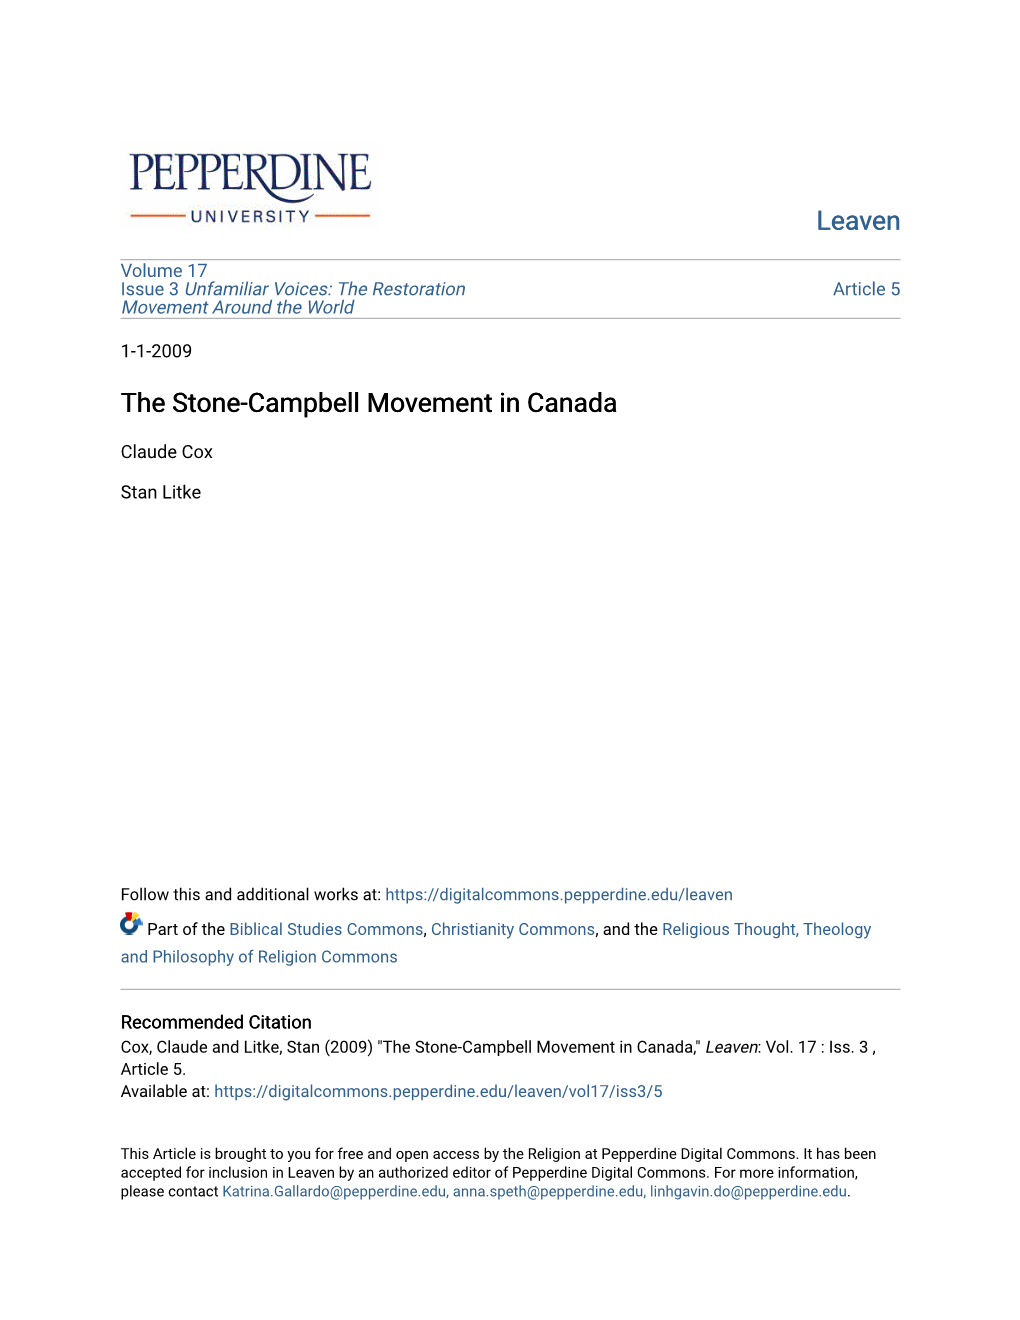 The Stone-Campbell Movement in Canada